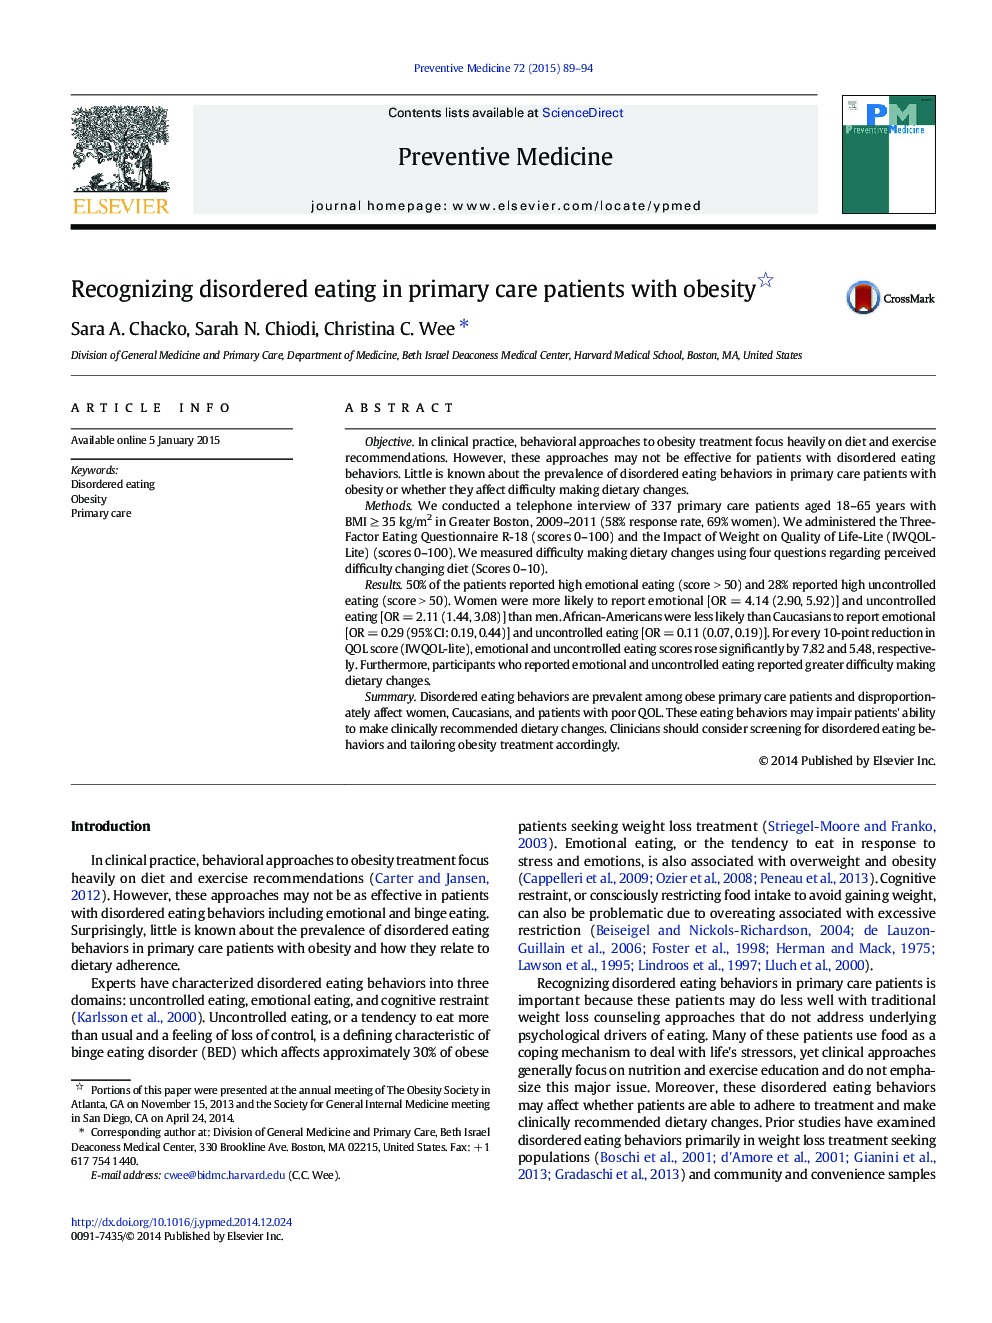 Recognizing disordered eating in primary care patients with obesity 